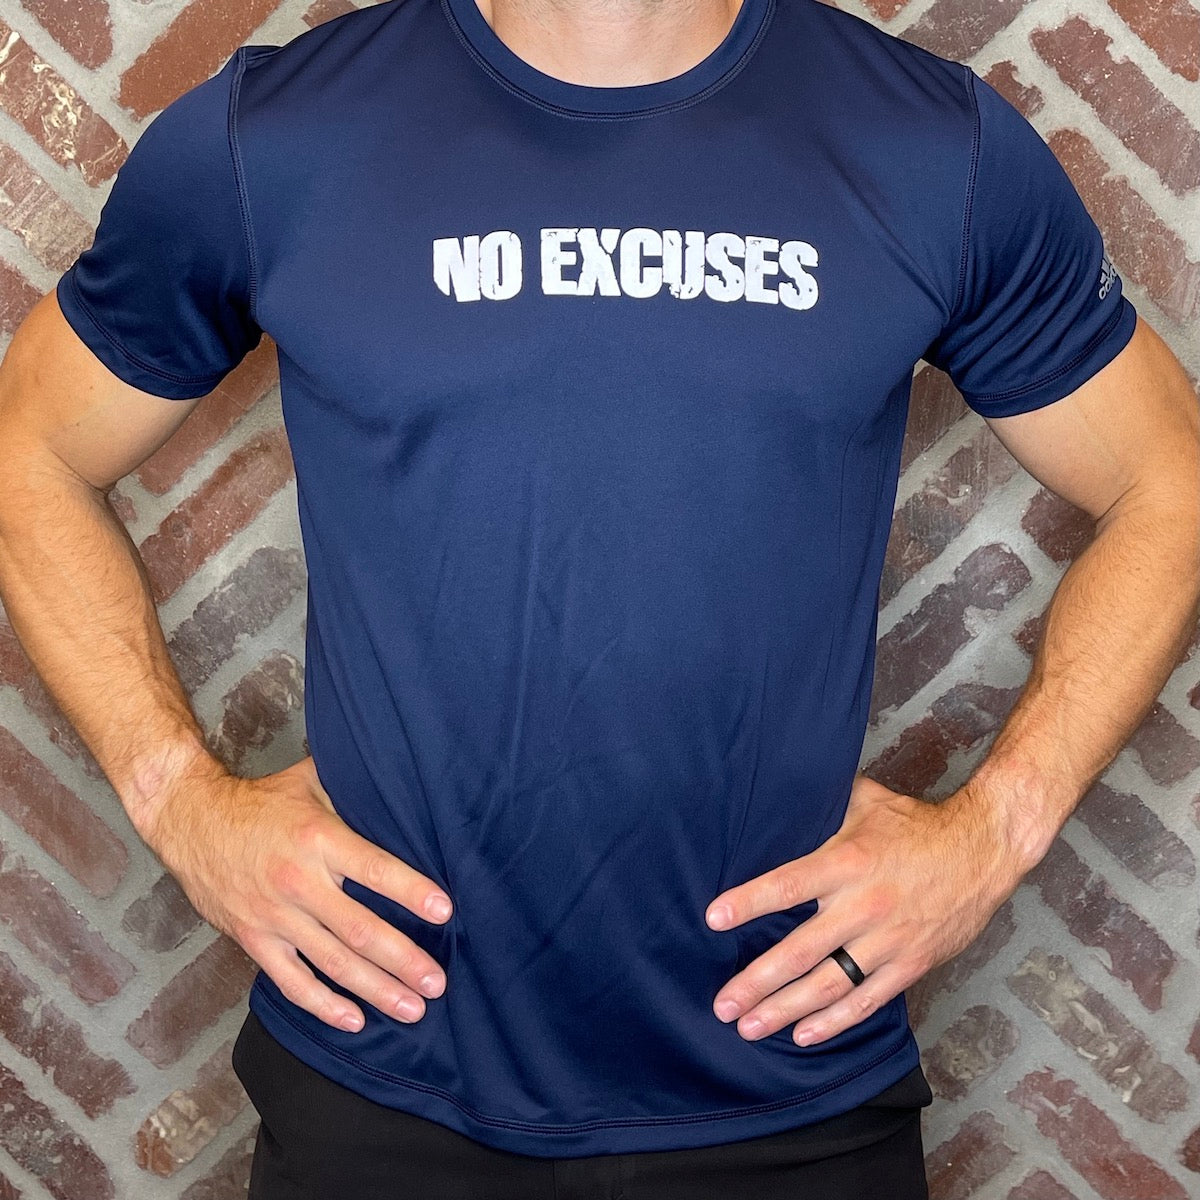 MK Supplements NO EXCUSES T-Shirt in Navy.